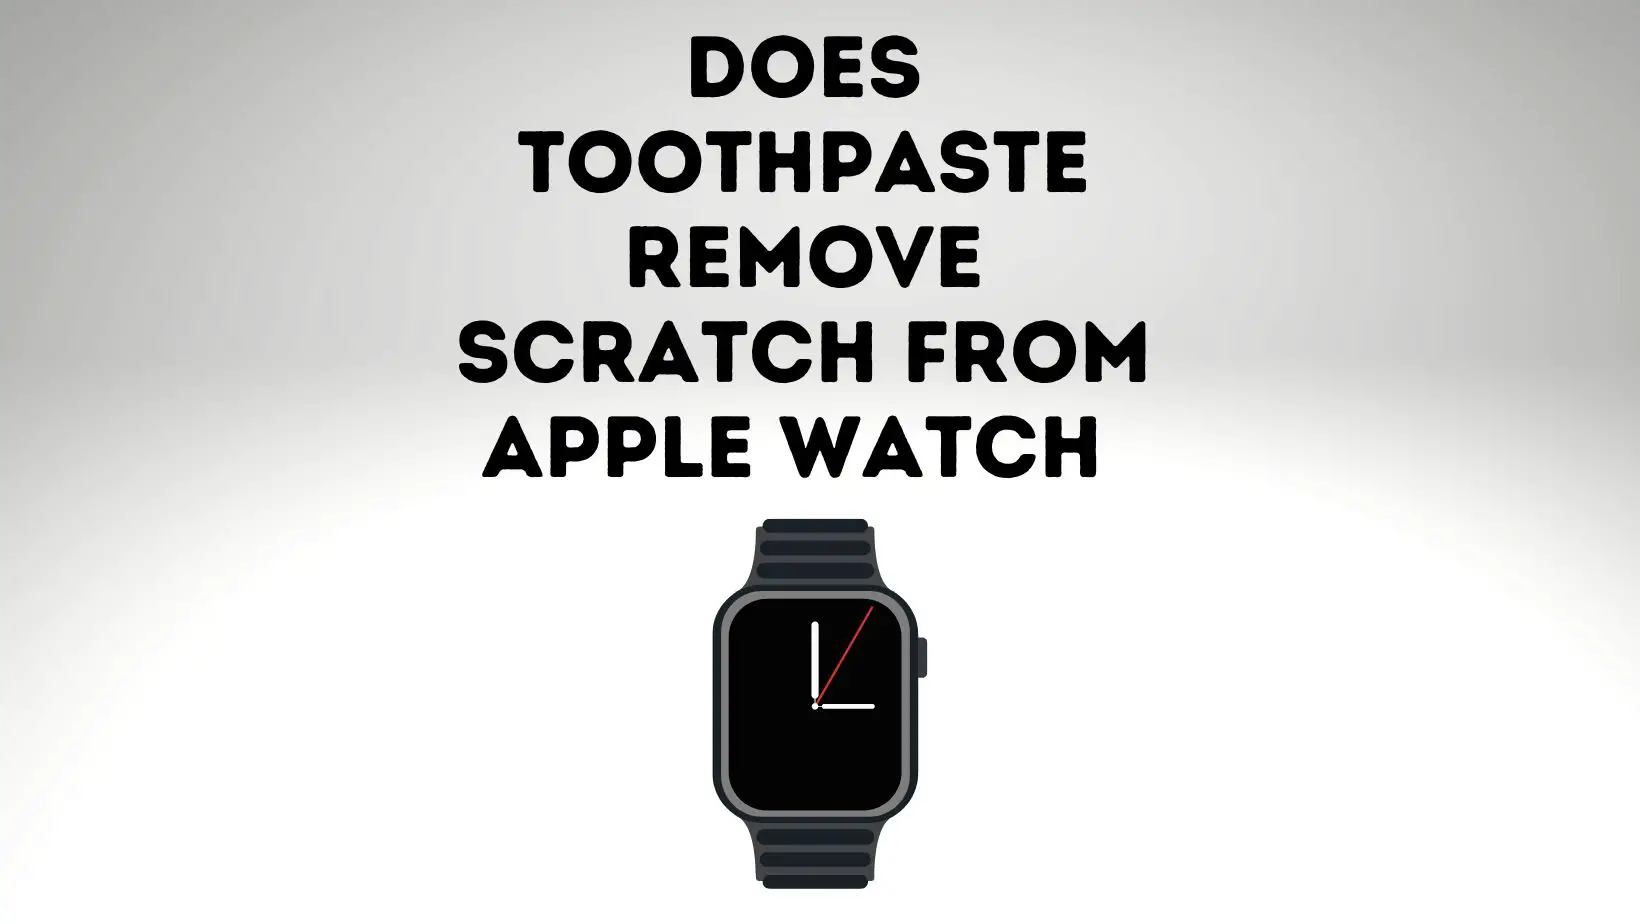 Does Toothpaste Remove Scratches From Apple Watch